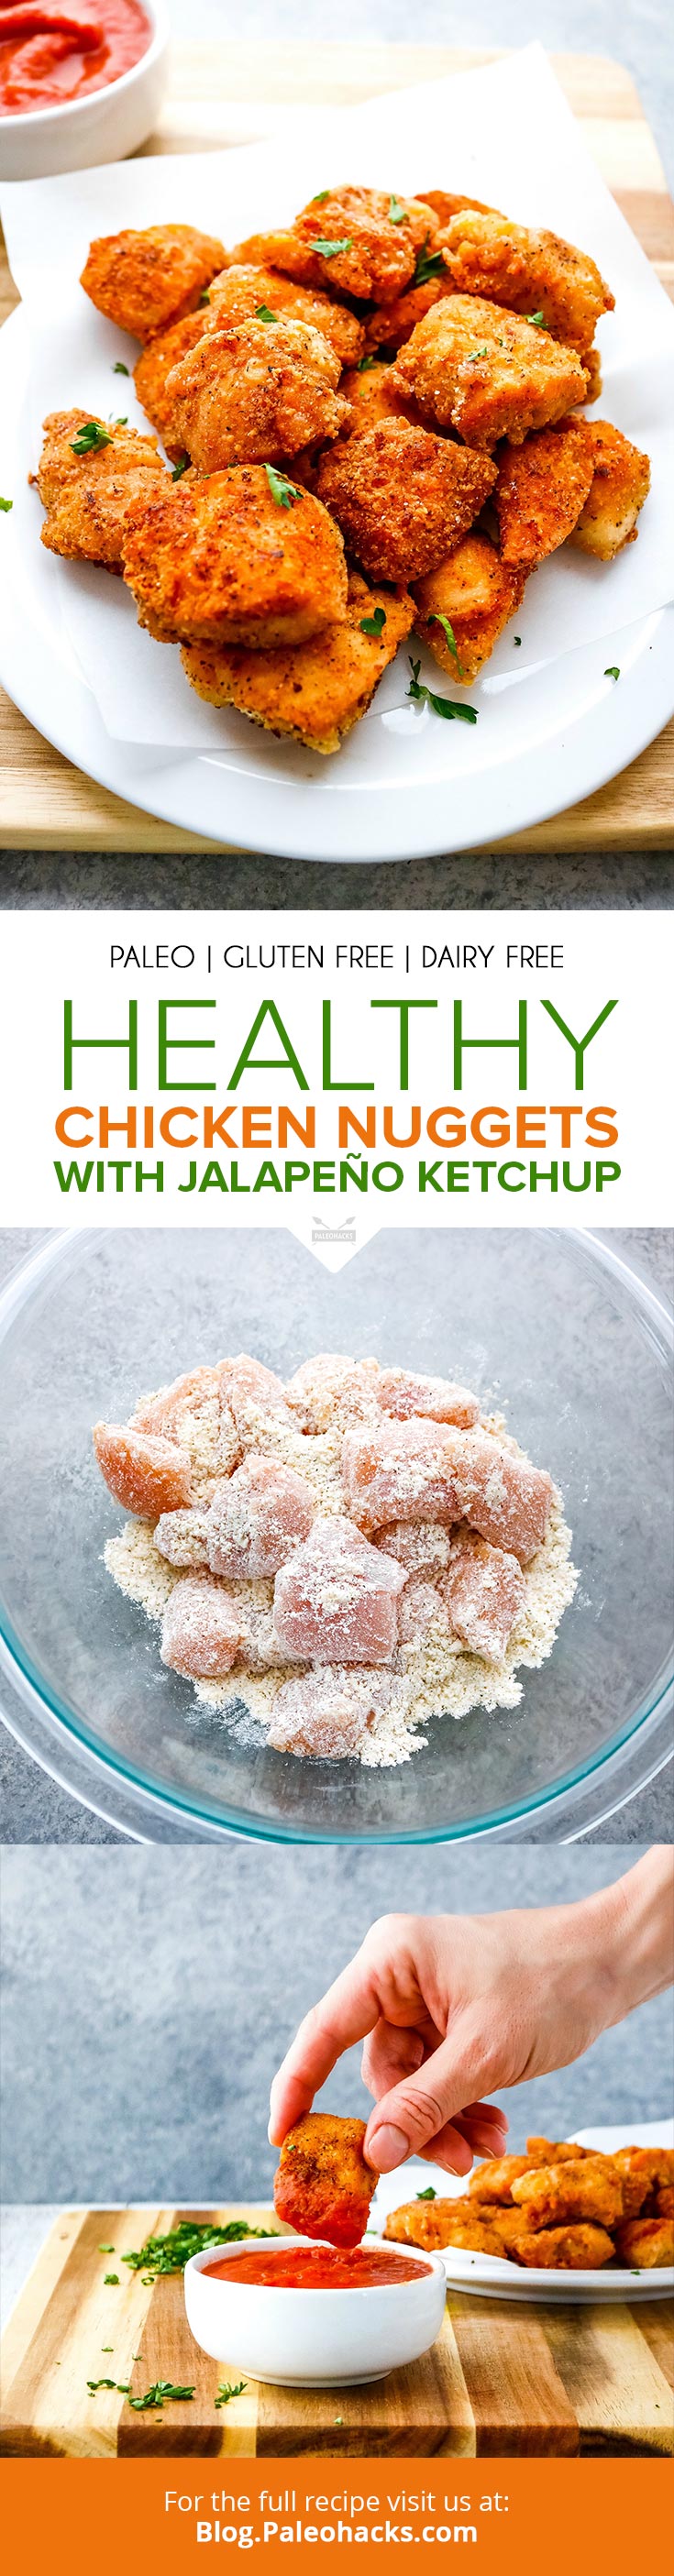 Skip the drive-thru and make these crispy chicken nuggets complete with a sugar-free ketchup you can use for dunking. They're kid and adult approved!